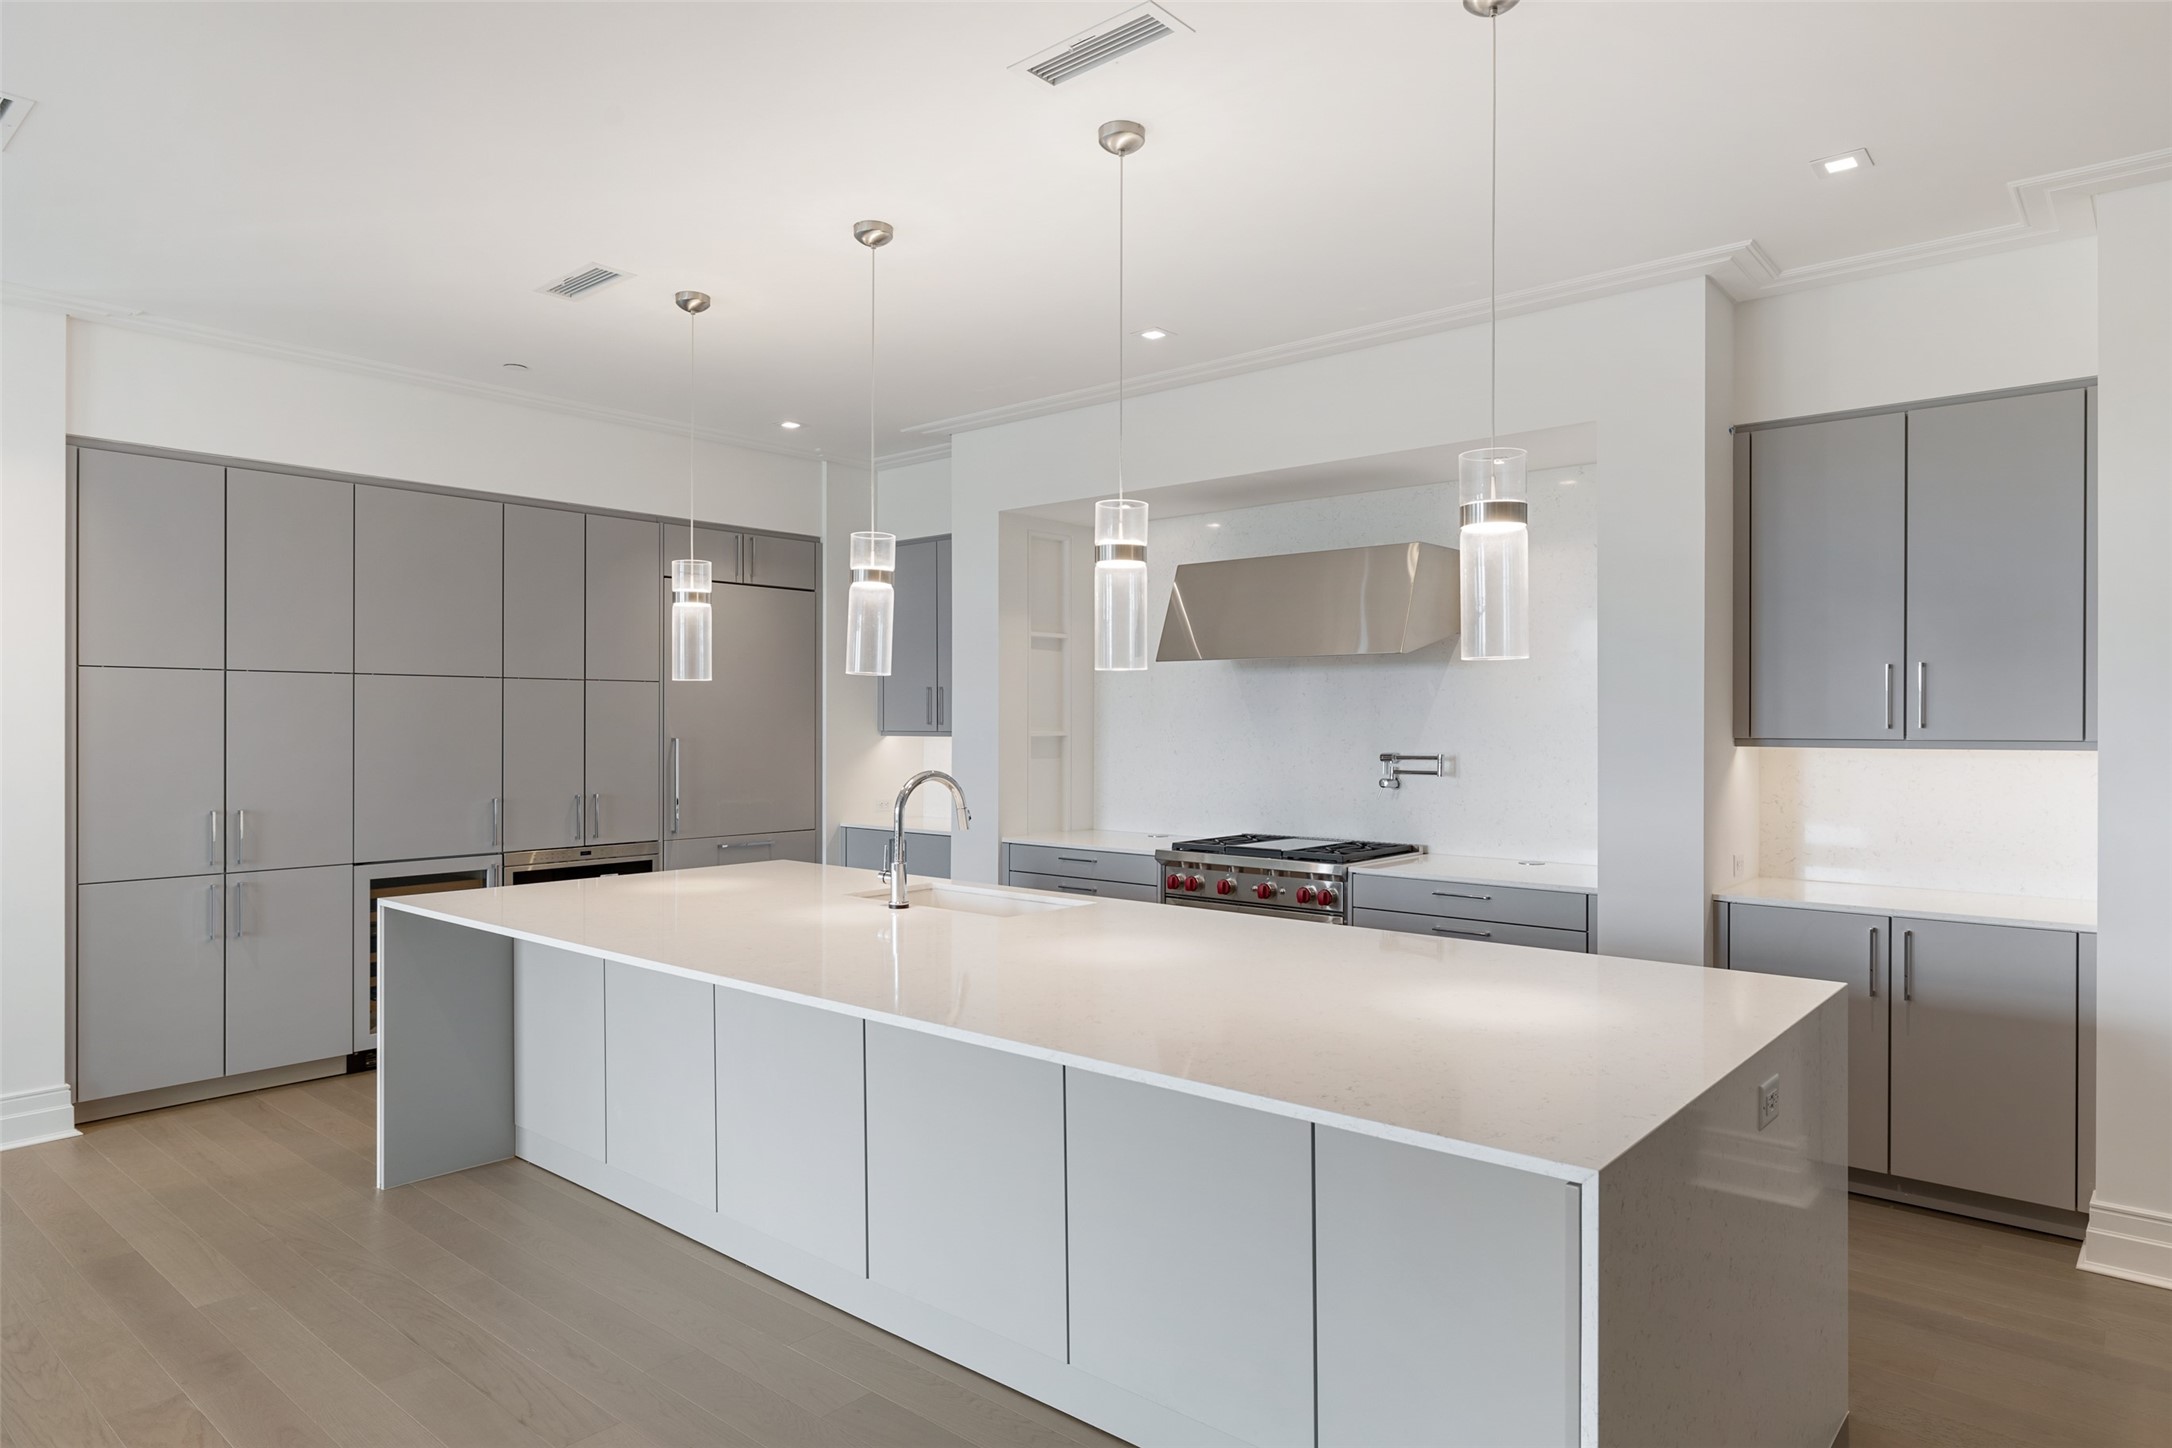 This sleek and sophisticated Kitchen features seamlessly integrated appliances and Quartz cabinets.